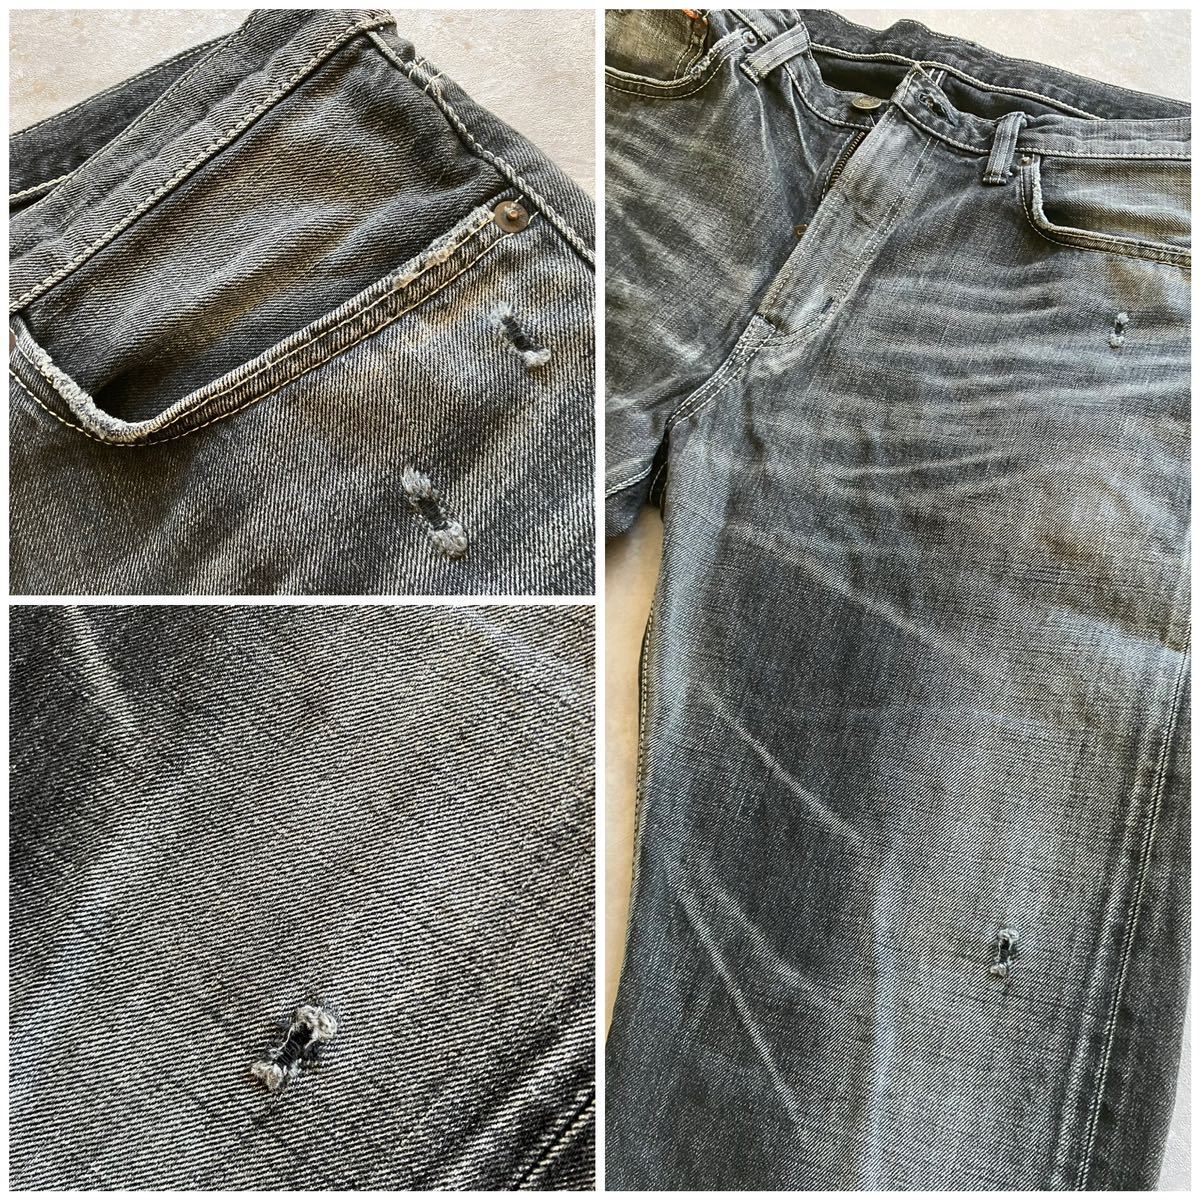  prompt decision W36 Edwin EDWIN 5052RV black Denim made in Japan MADE IN JAPAN orange cell bichi jeans ear attaching damage processing slim tapered 